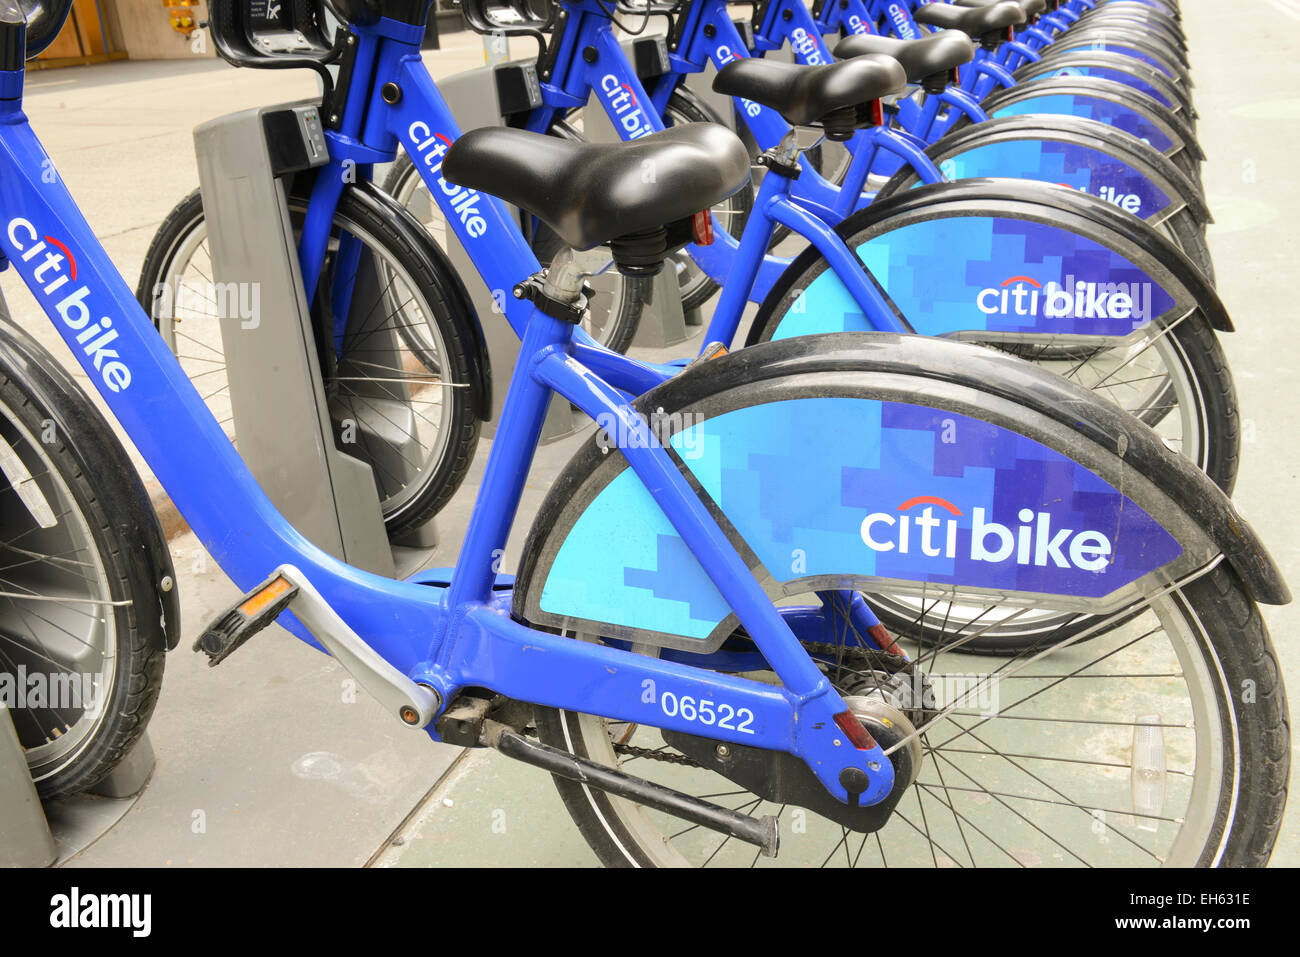 New York, March 2, 2014. Citi Bike, a Bicycle share program in Manhattan gives residents one more transportation option Stock Photo